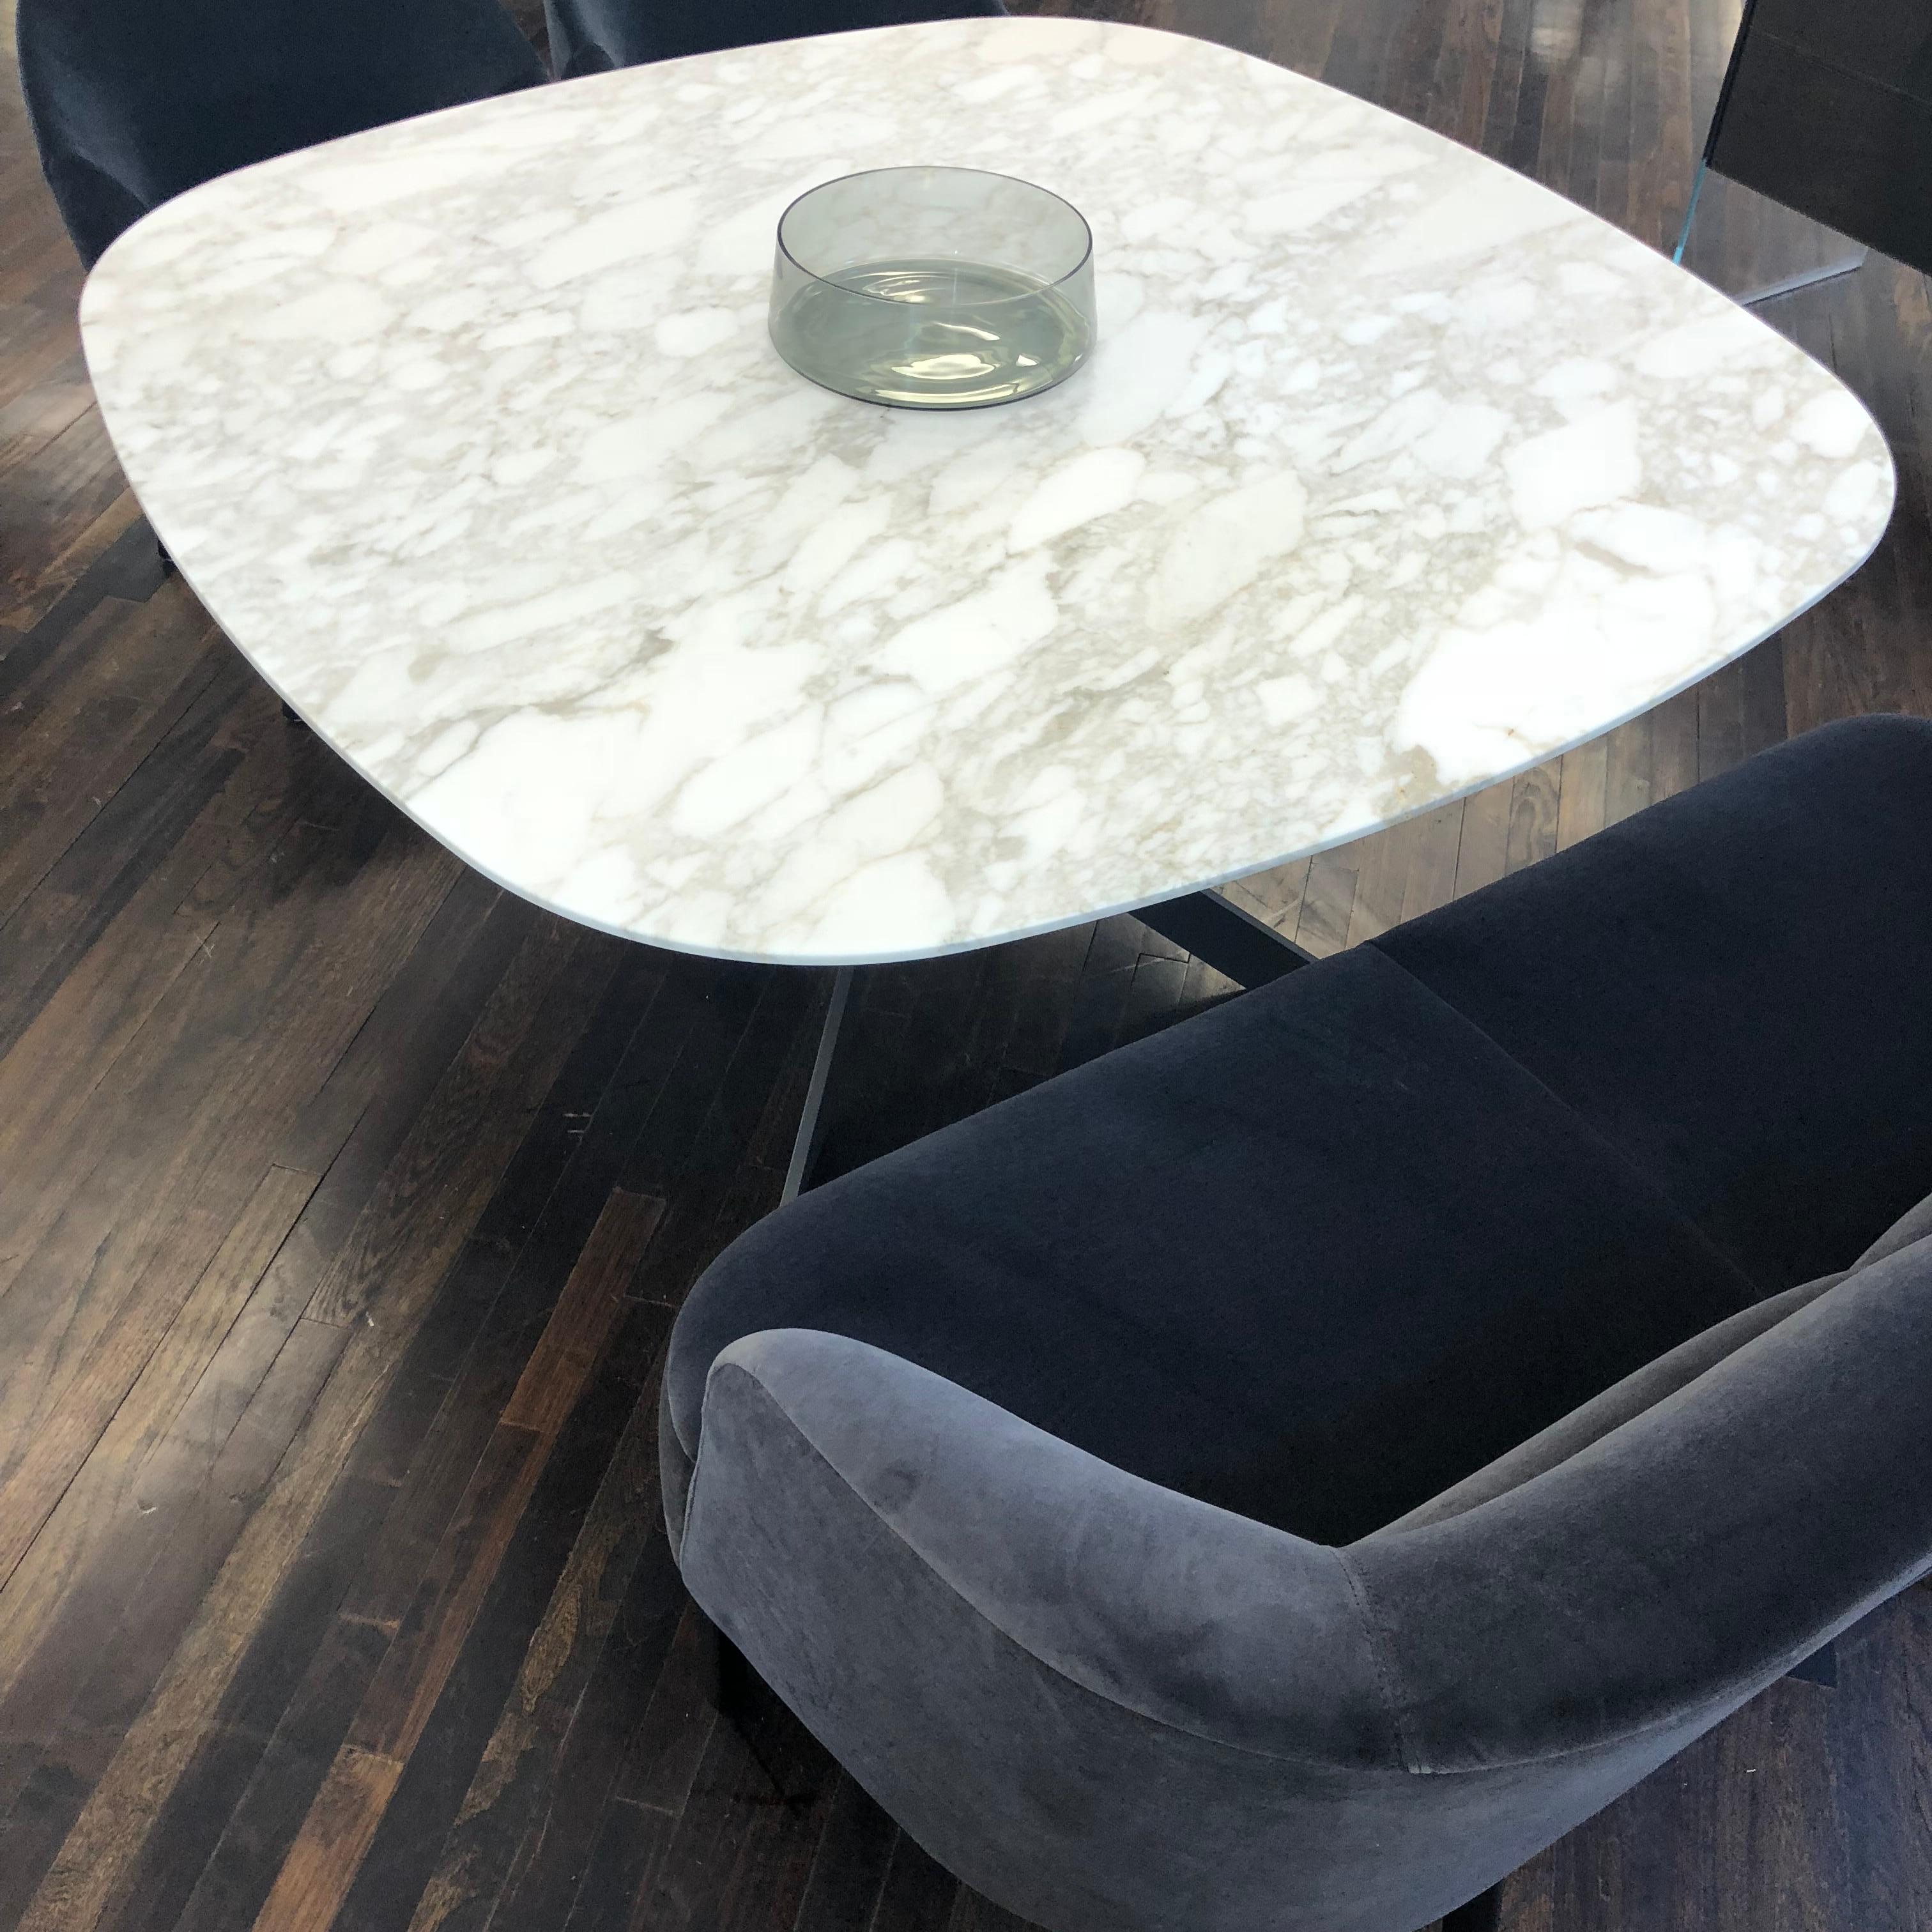 Iblea marble table 150 x 150cm
Calacatta Oro marble 
Brown Bungee frame

The Iblea table combines a dynamic design with technological elegance. Table with frame of laser-cut steel plate.